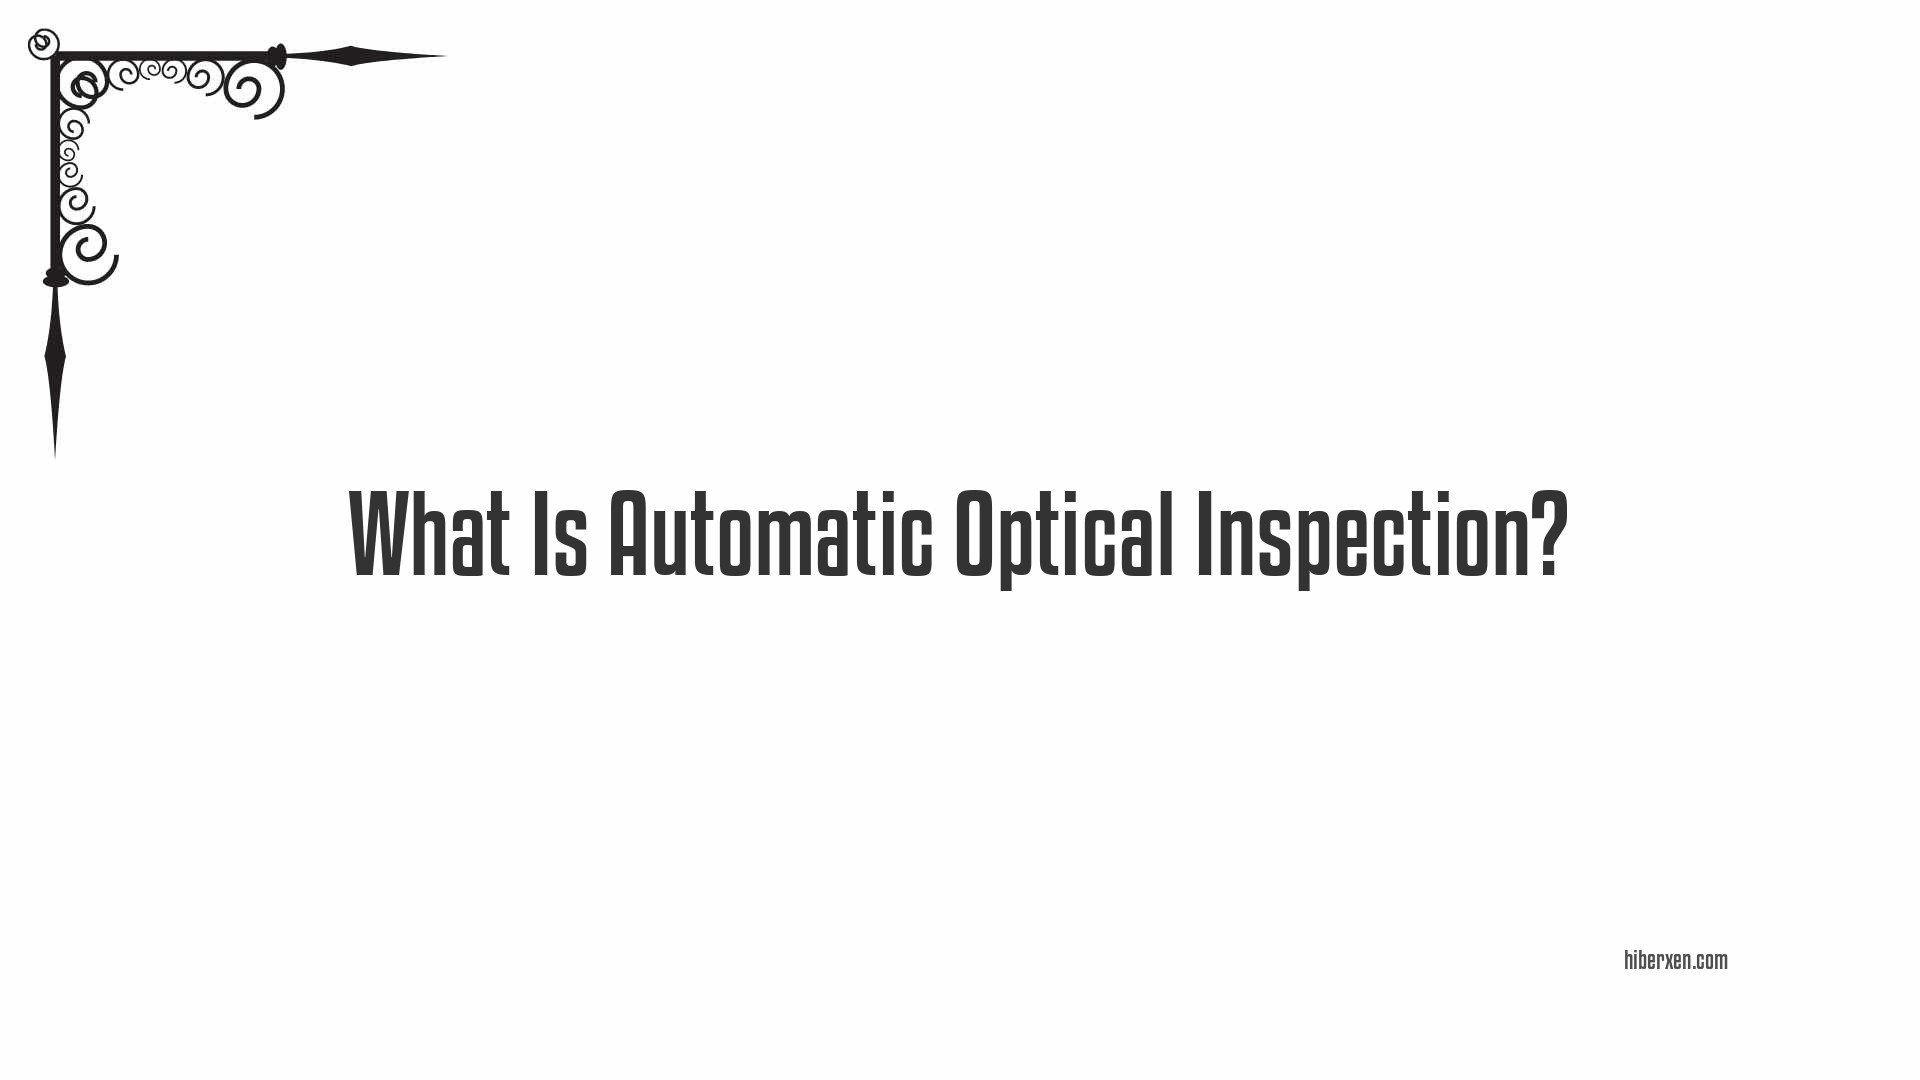 What Is Automatic Optical Inspection?